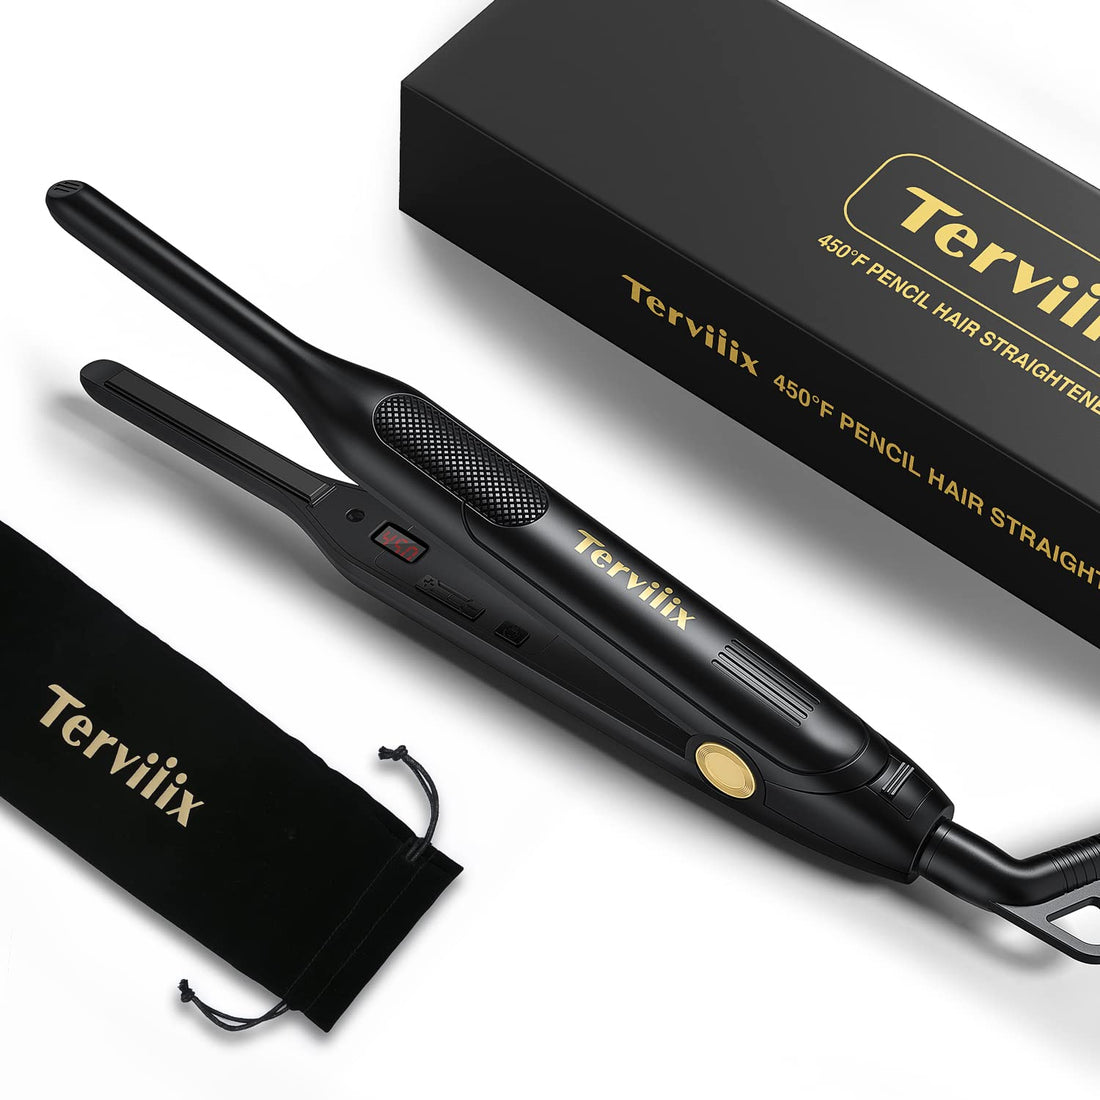 Terviiix Pencil Small Flat Iron For Edge&Short Hair,3/10 Inch Small Hair Straightener For Men,Ceramic Mini Flat Iron For Pixie&Beard,15S Fast Heat Up,Dual Voltage,Auto Shut Off,Black